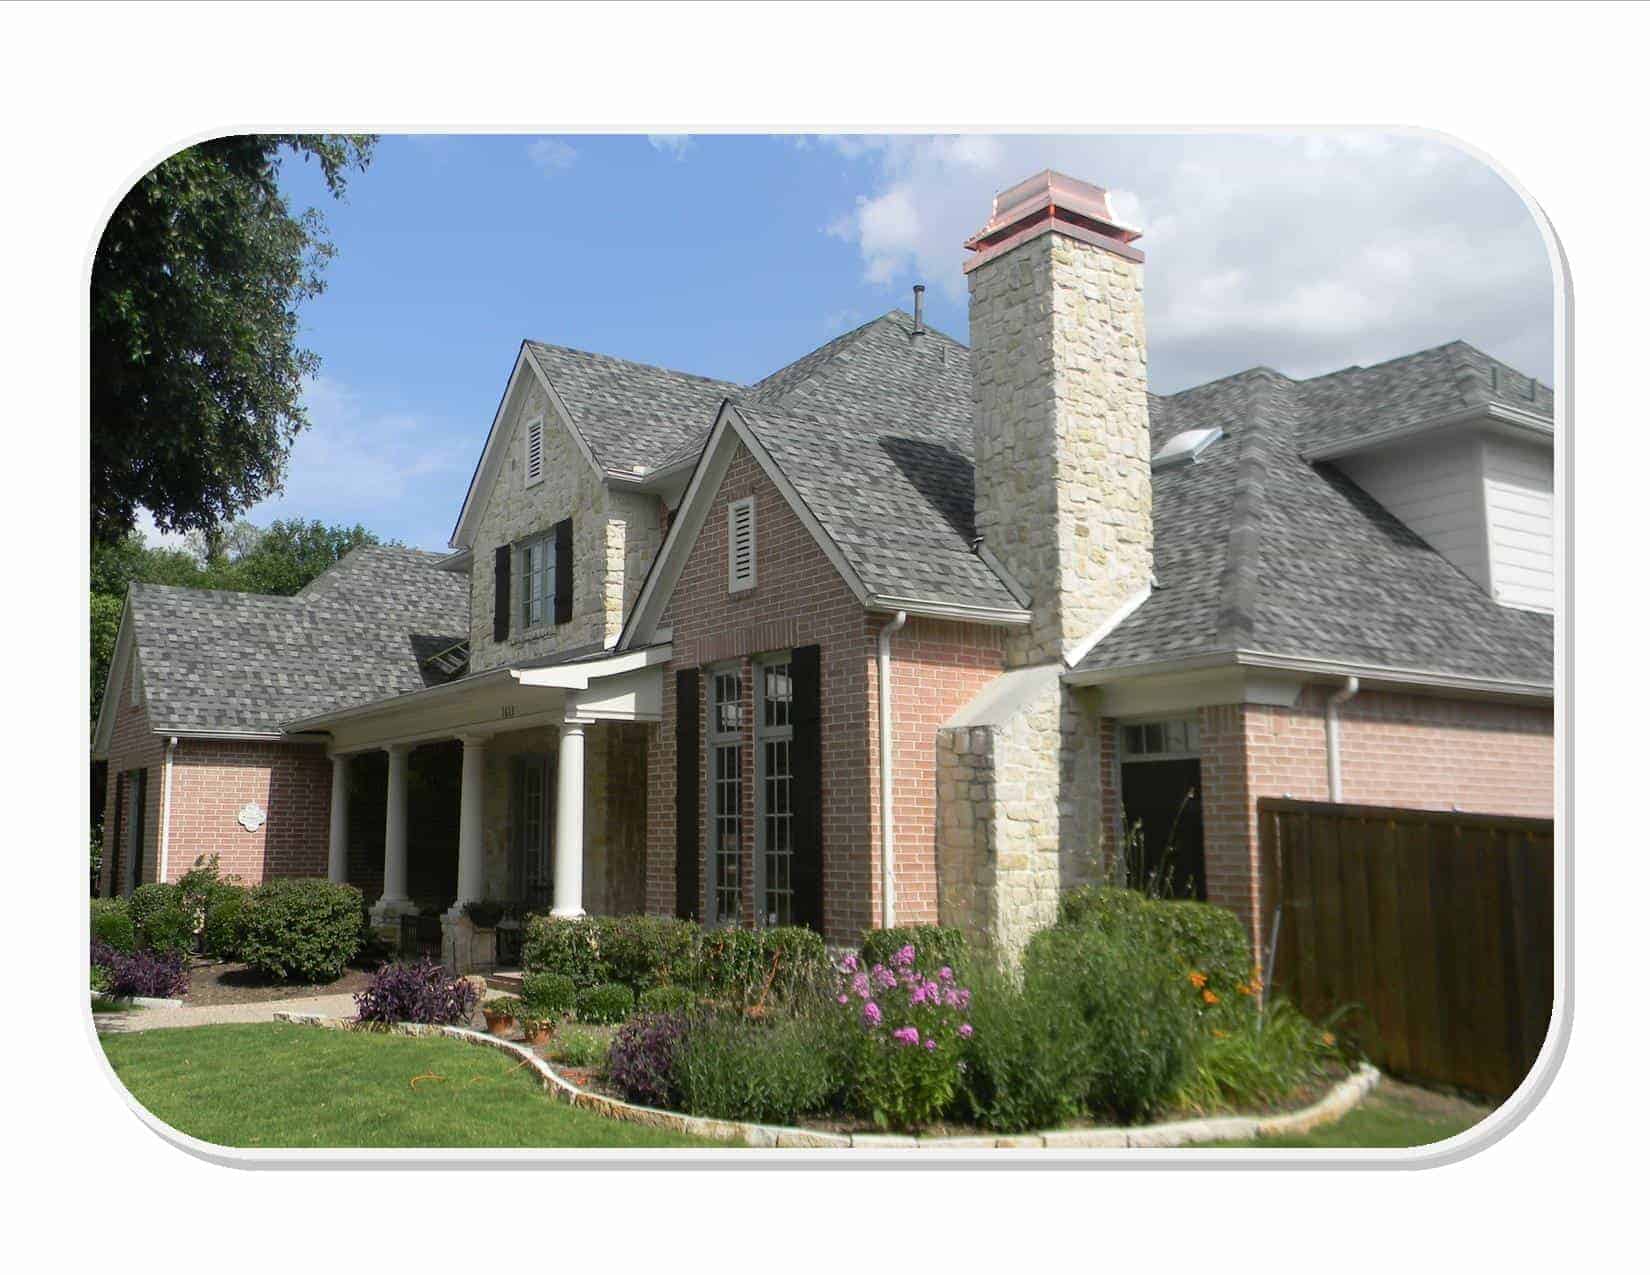 Chimney Example on House in Houston